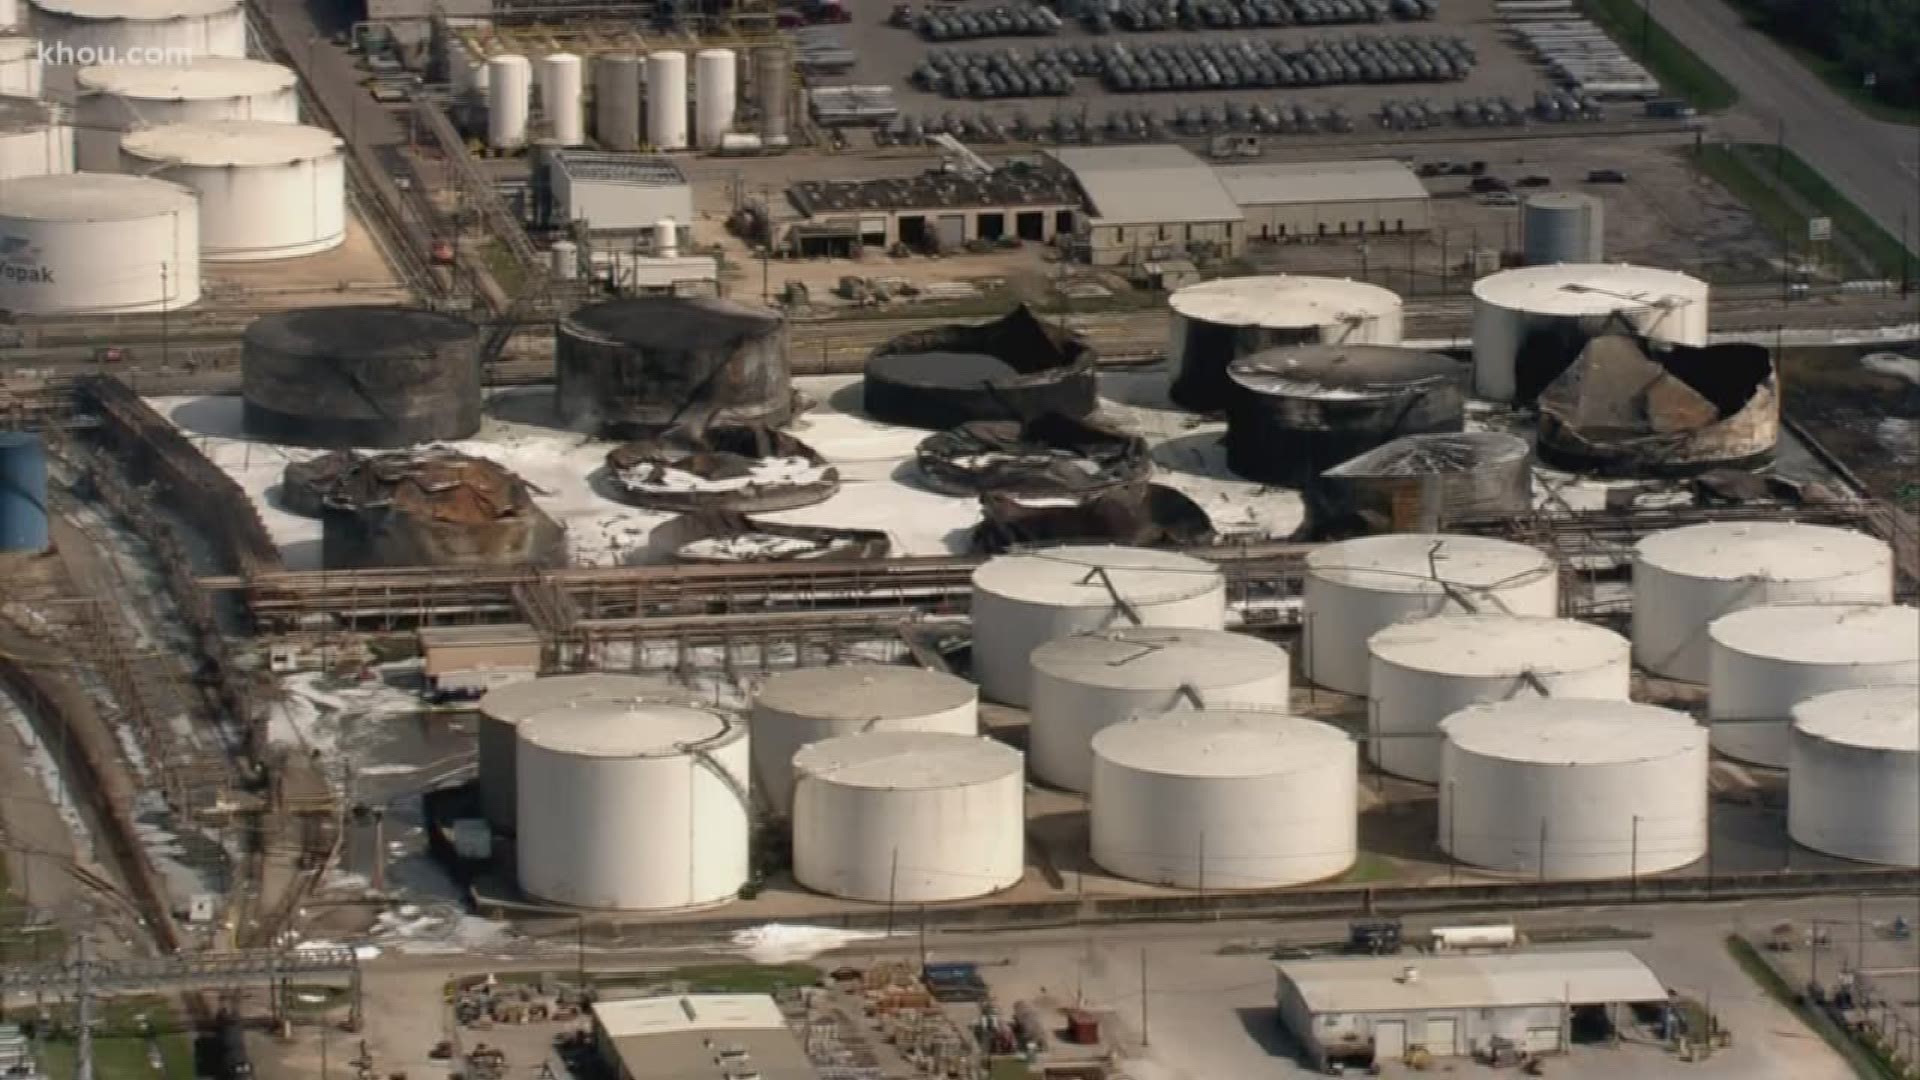 We have heard from many KHOU 11 viewers are still worried about potential health hazards from the ITC chemical fire.